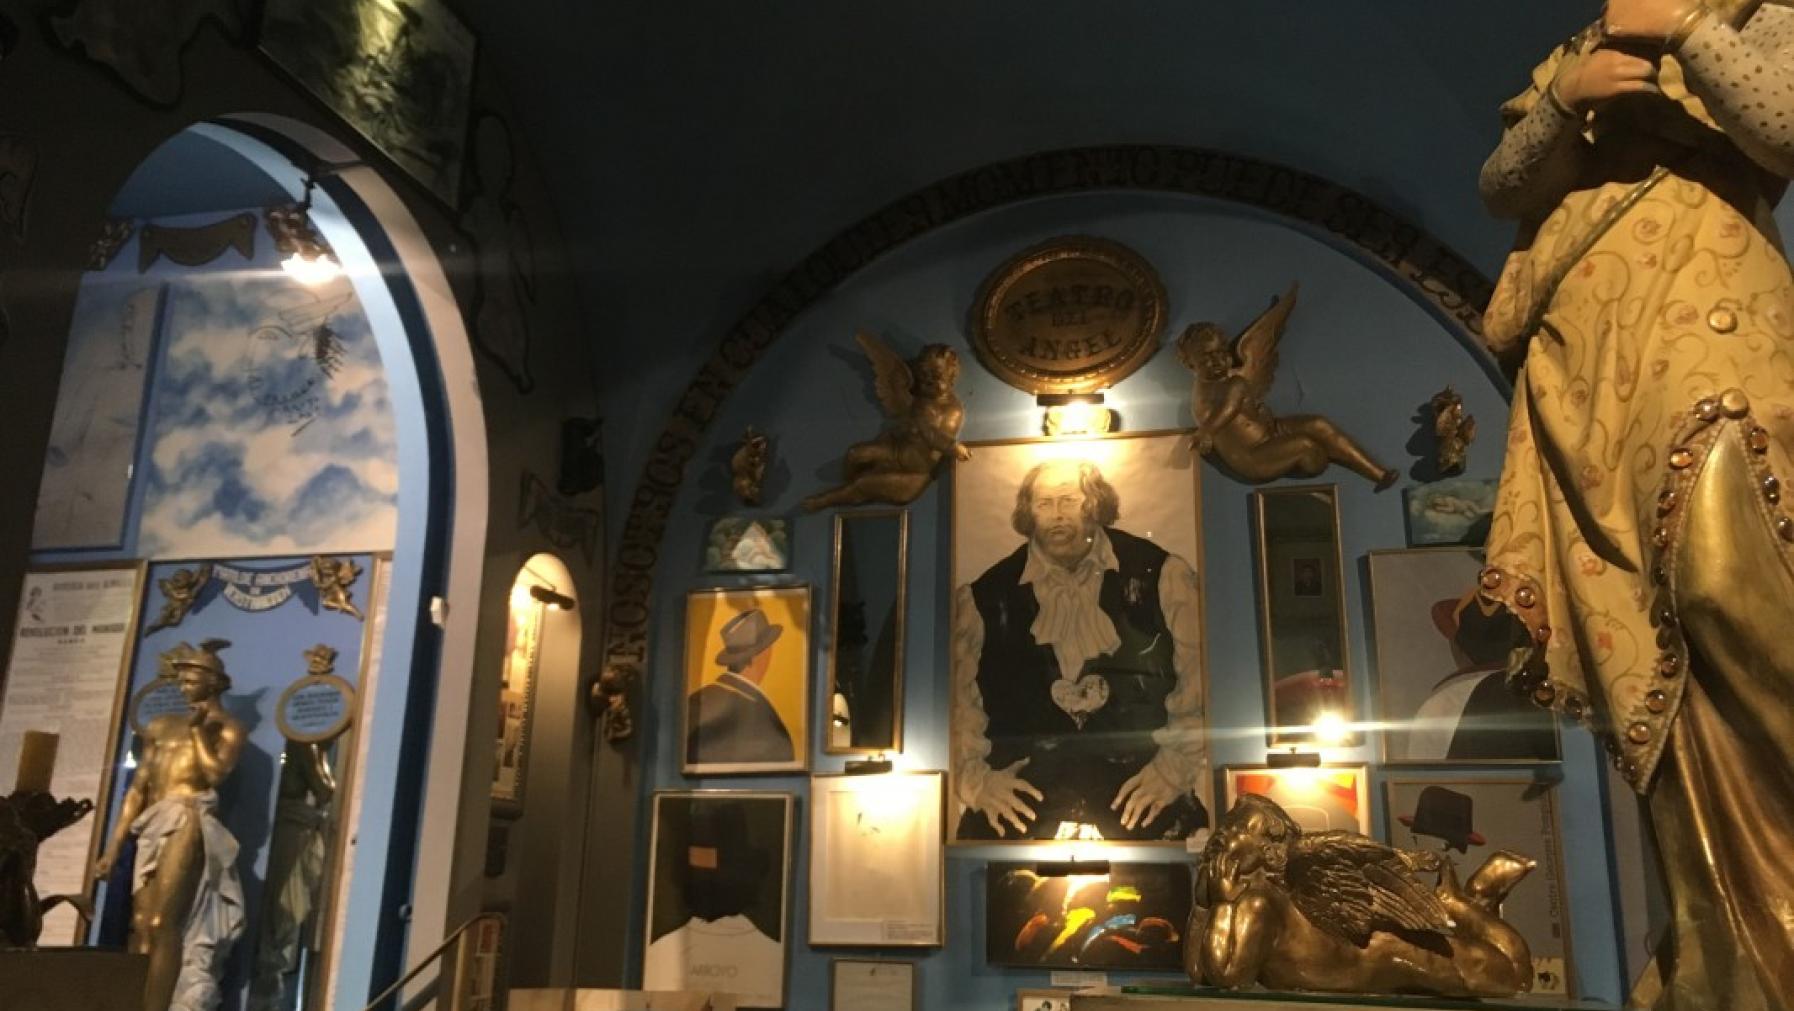 A room with religious images.